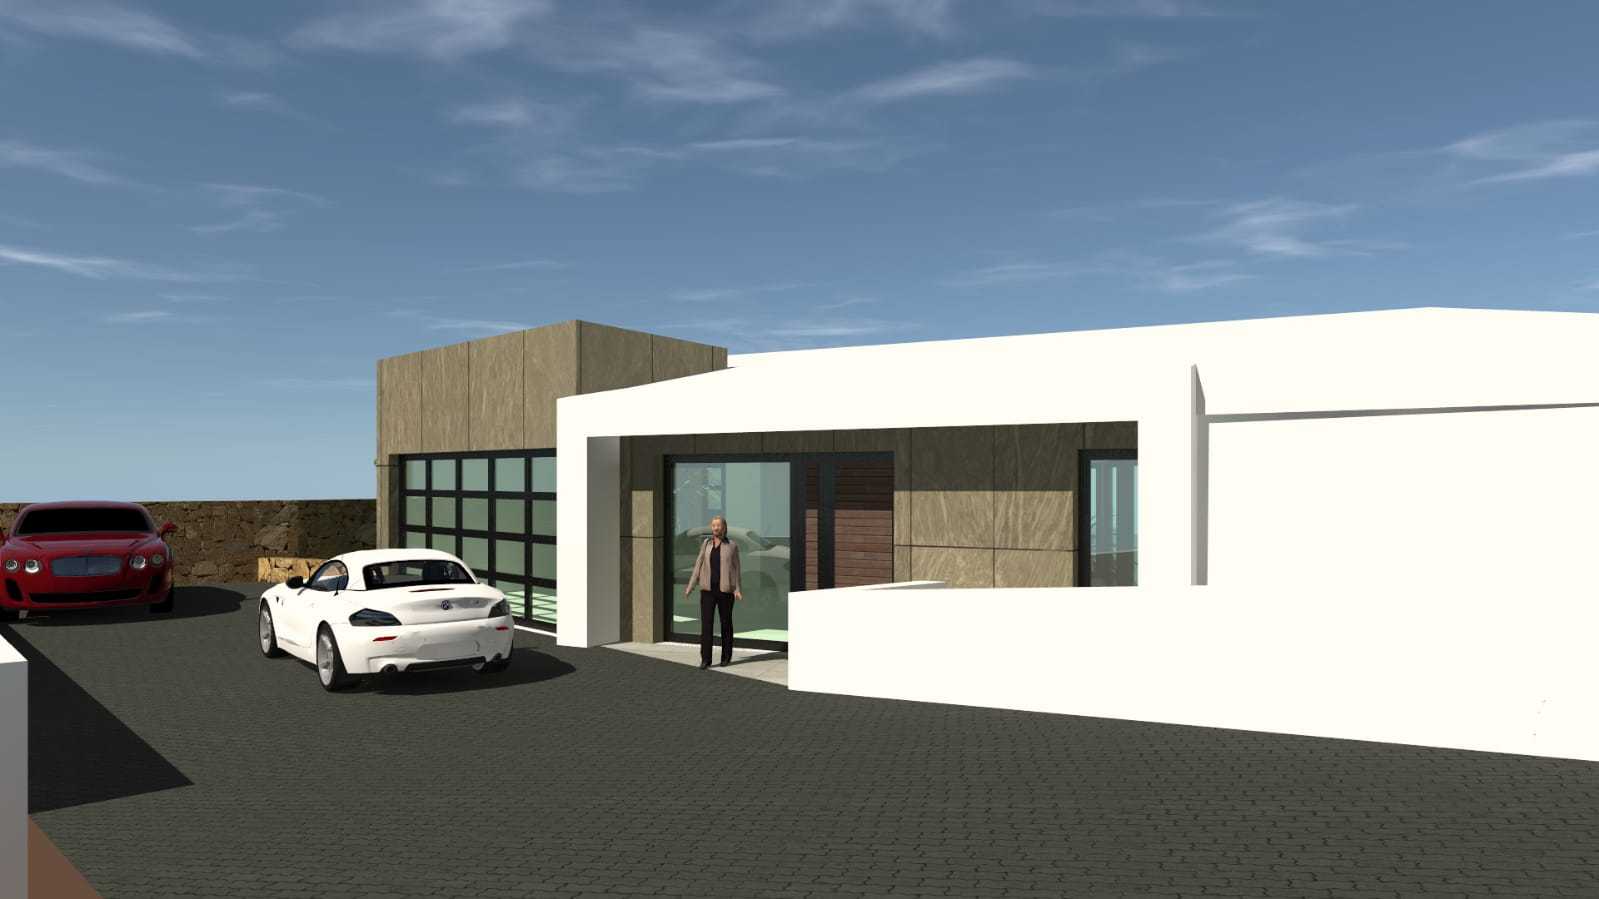 NEW PROJECT OF LUXURY IN CALPE 4 HOMES